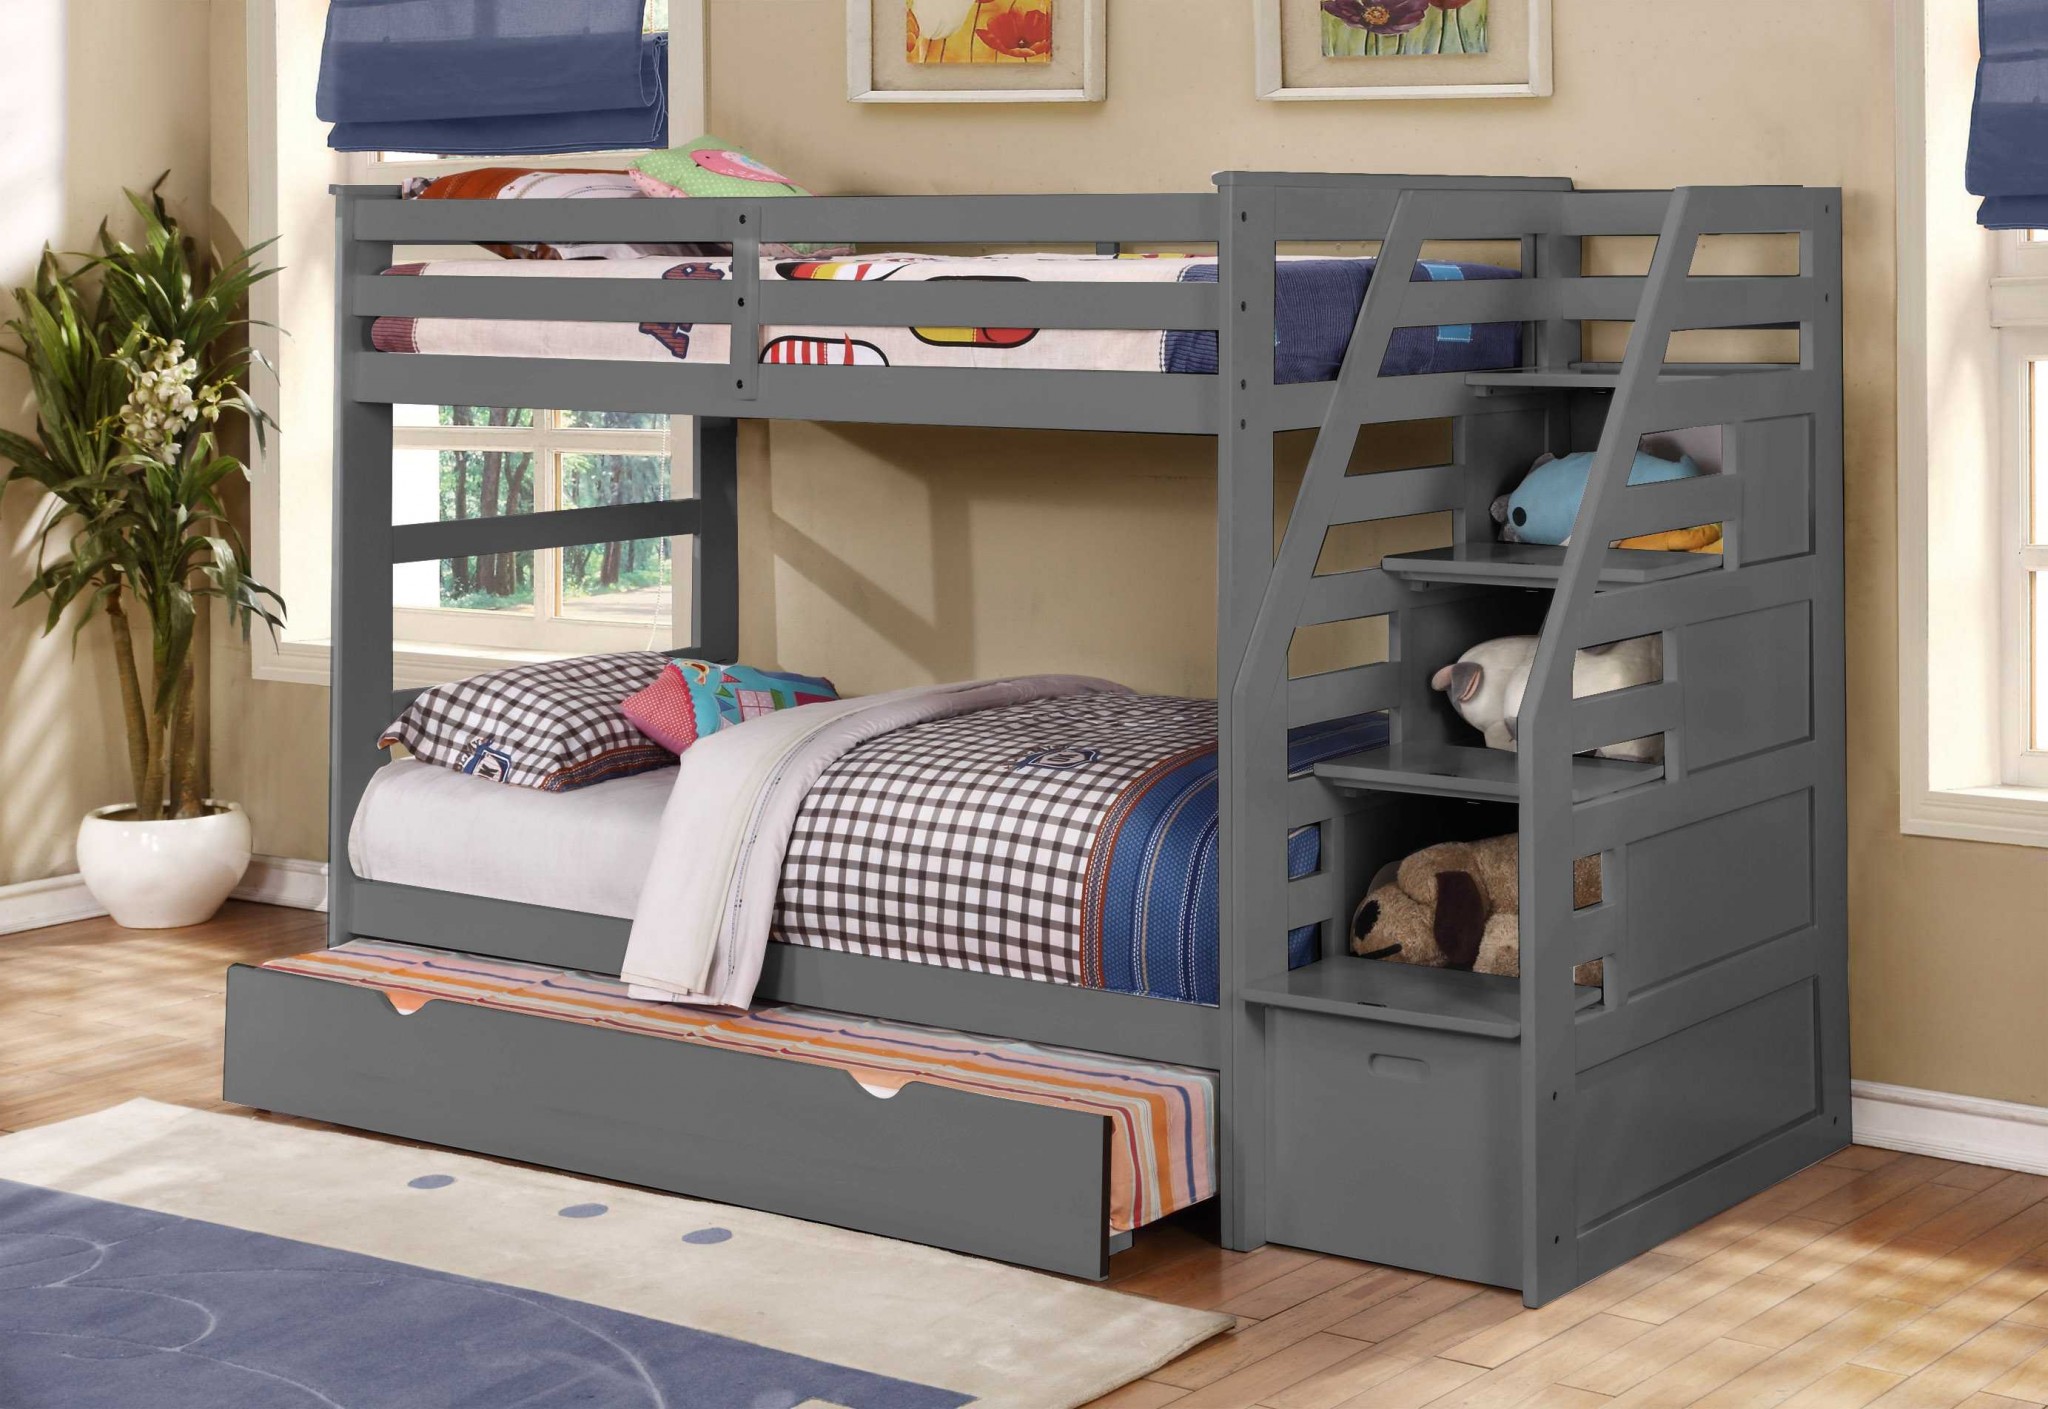 77.75" X 43.5" X 62.5" Grey Manufactured Wood and Solid Wood Twin or Twin Staircase Bunk Bed with Trundle & Storage Steps